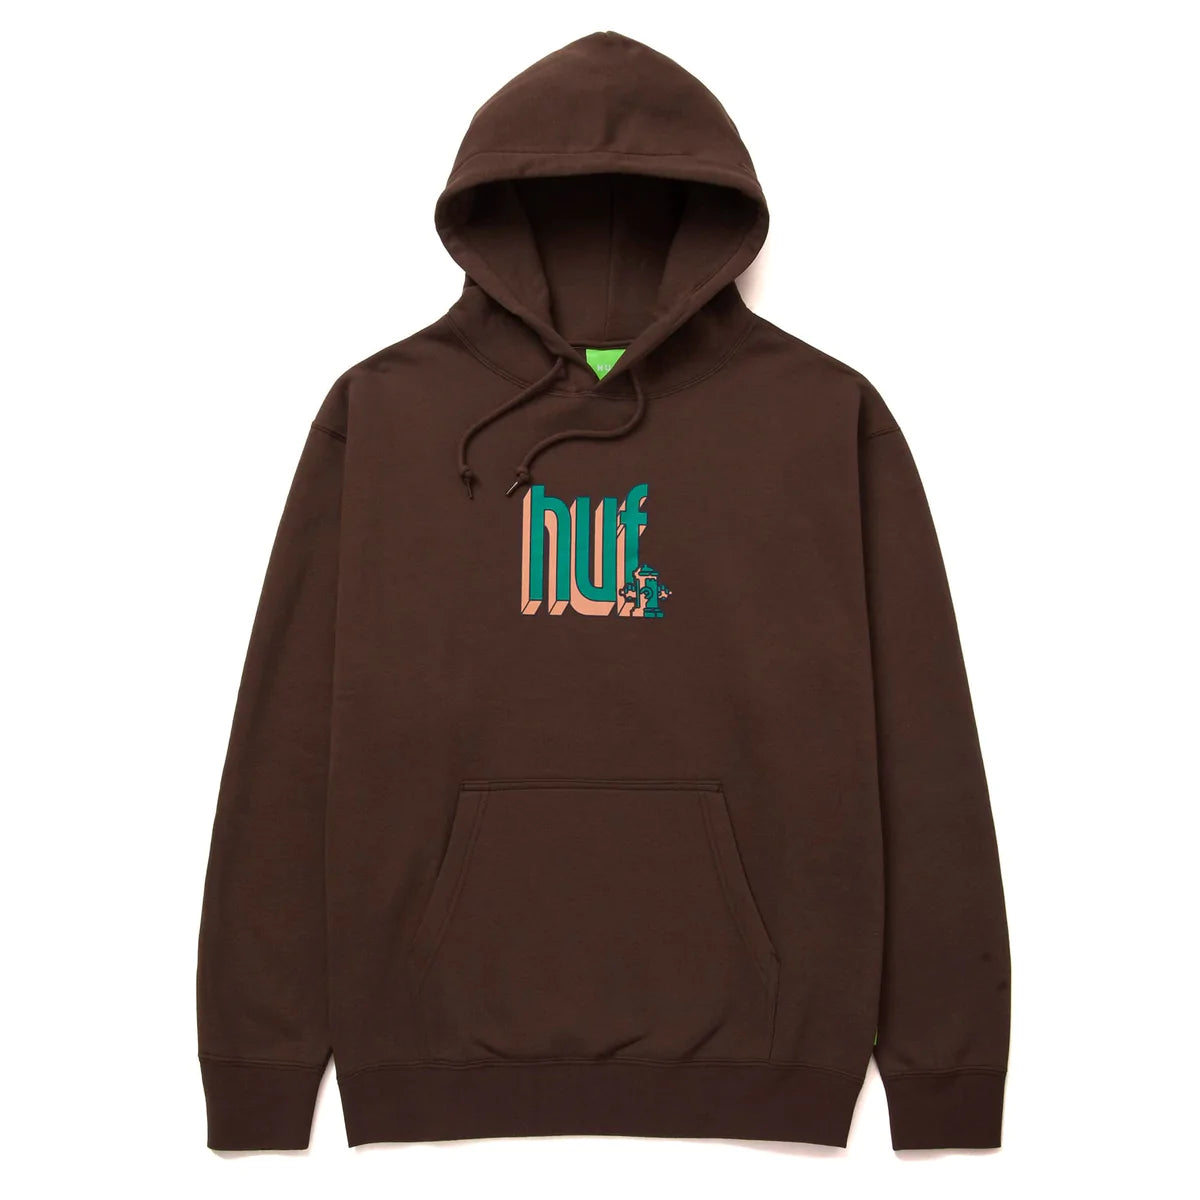 HUF - Bookend Pullover Hoodie